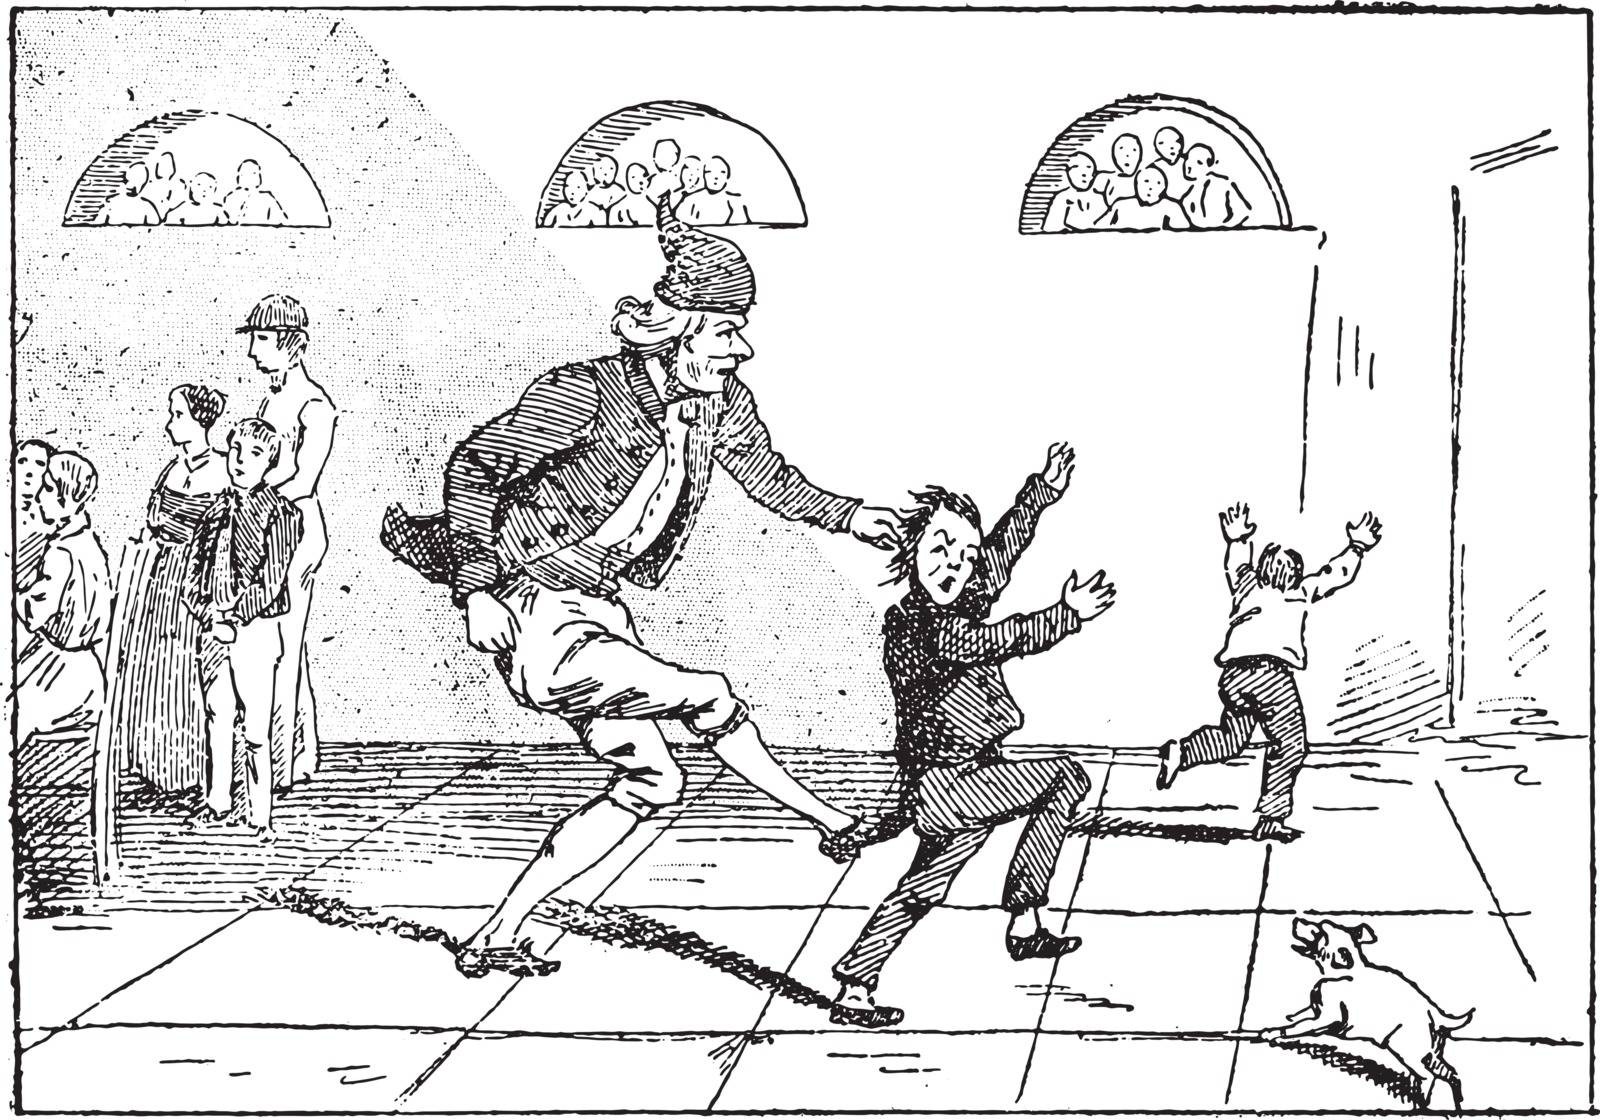 The progenitor gives chase to his grand-son, vintage engraved illustration.
